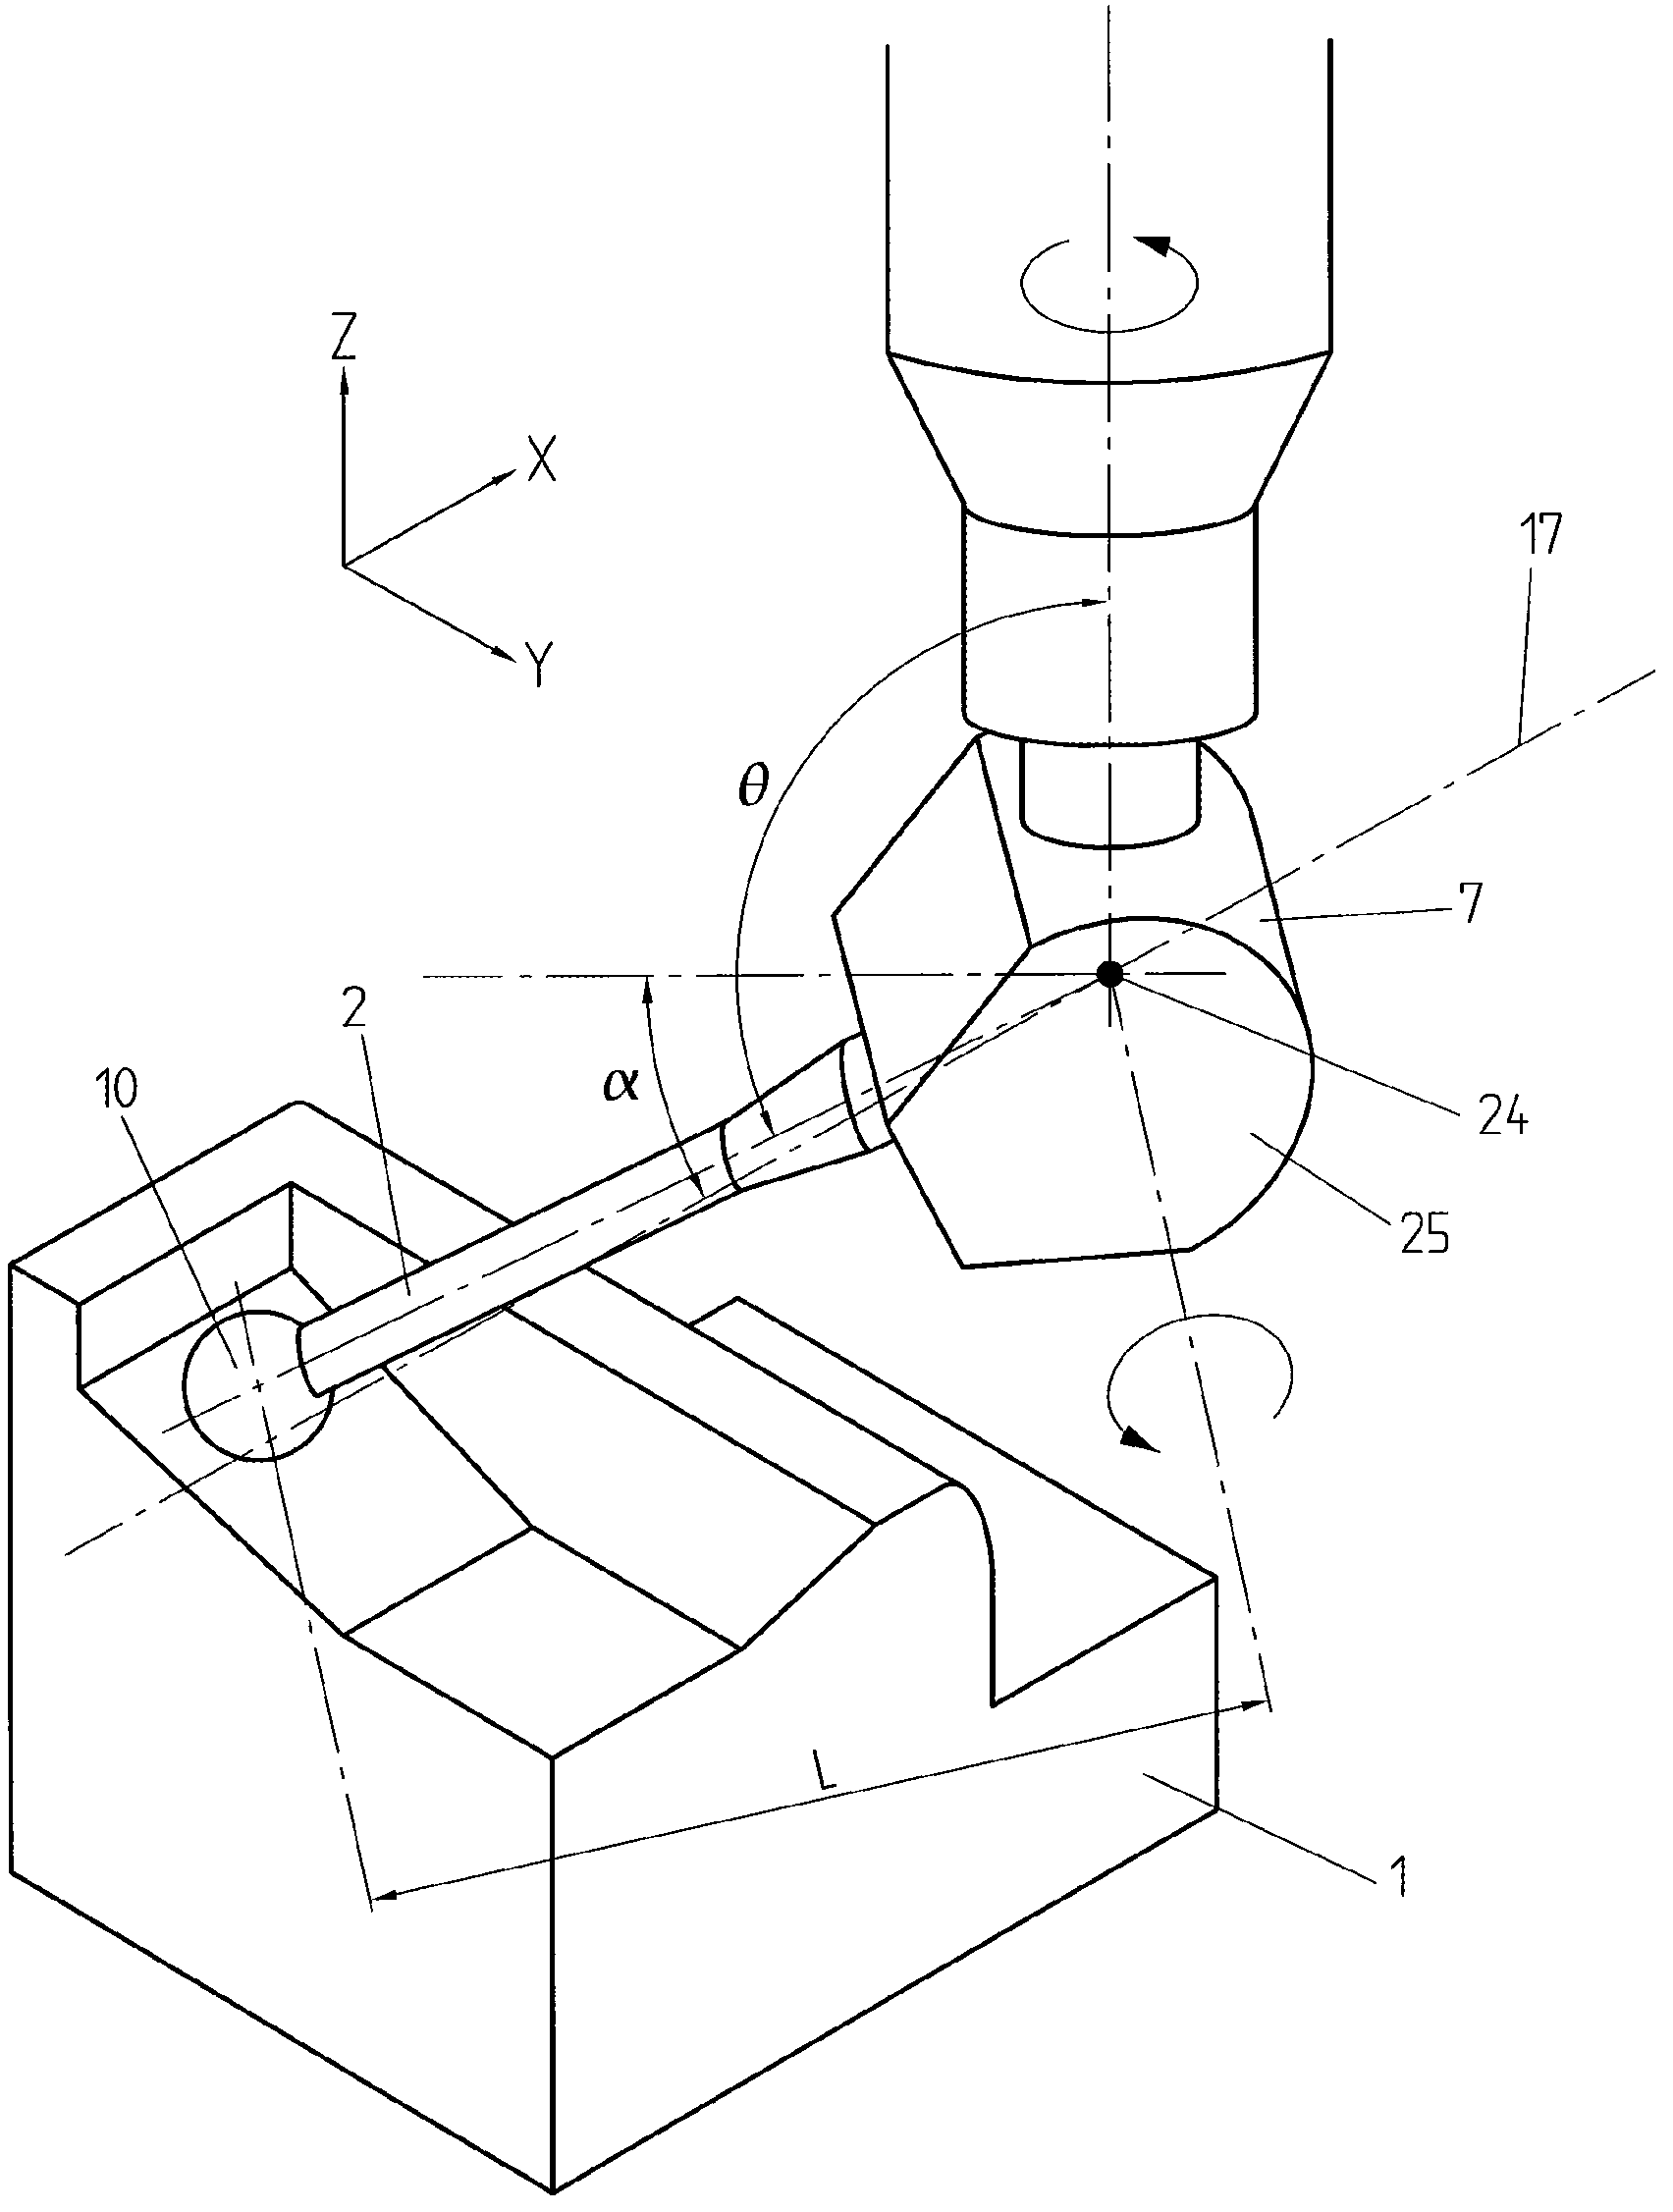 Oscillating scanning probe with constant contact force